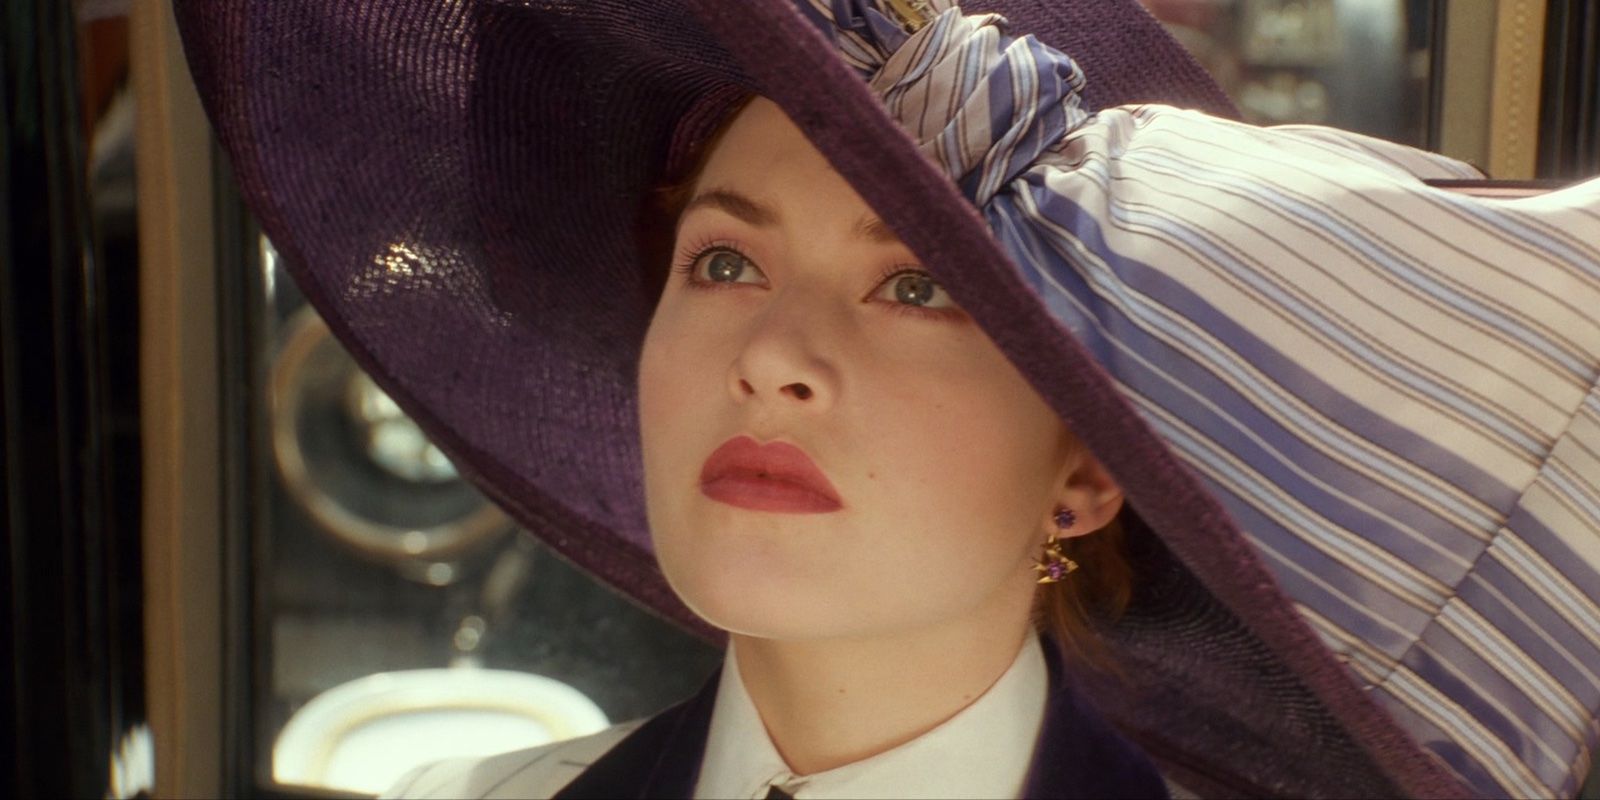 How Old Was Kate Winslet in Titanic?